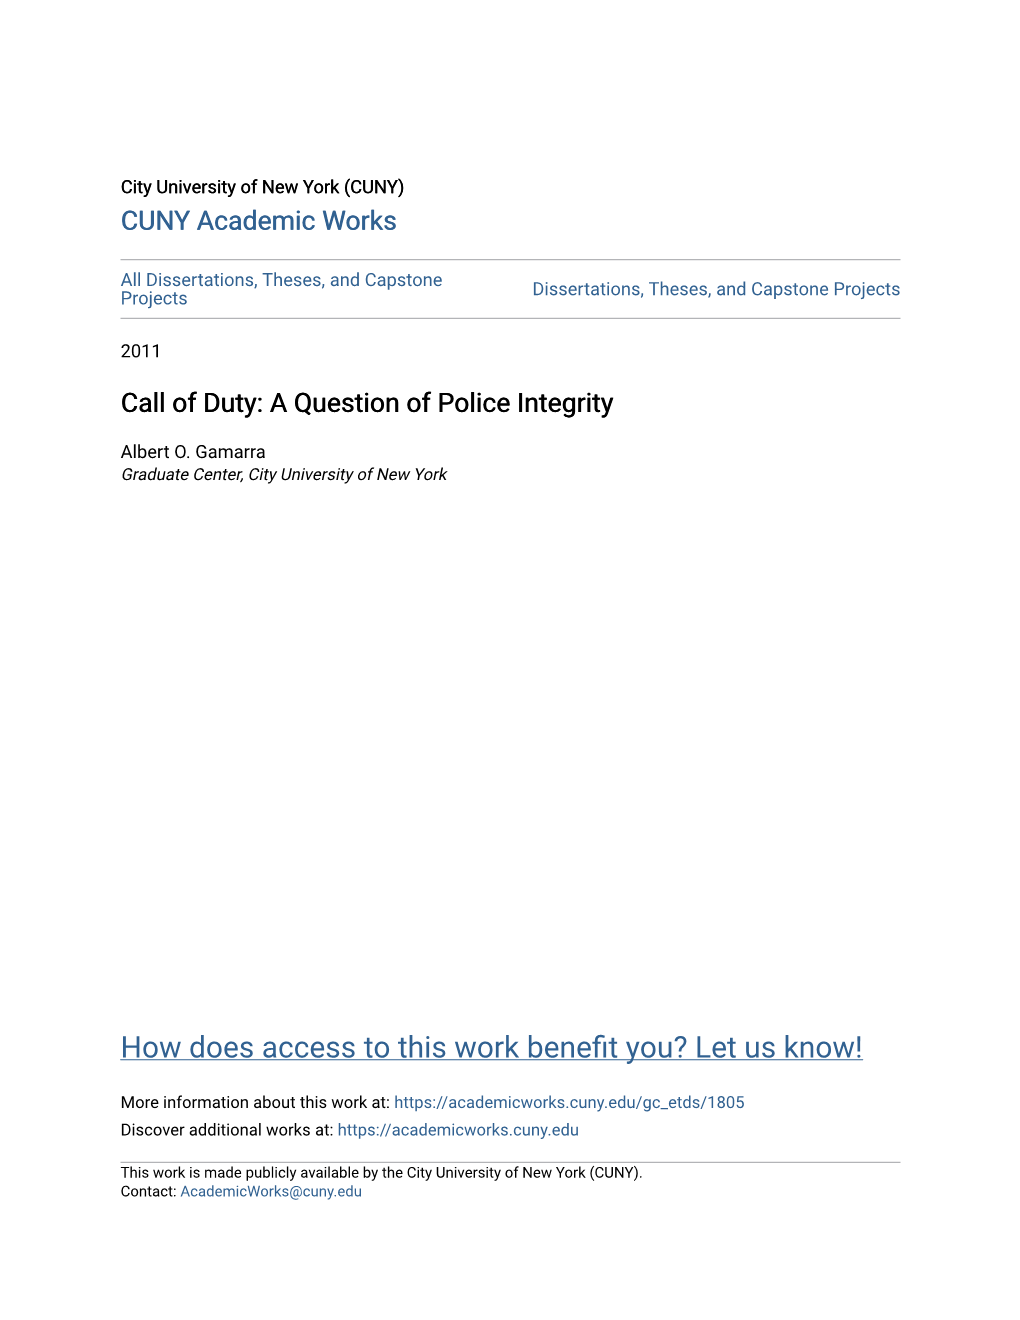 A Question of Police Integrity